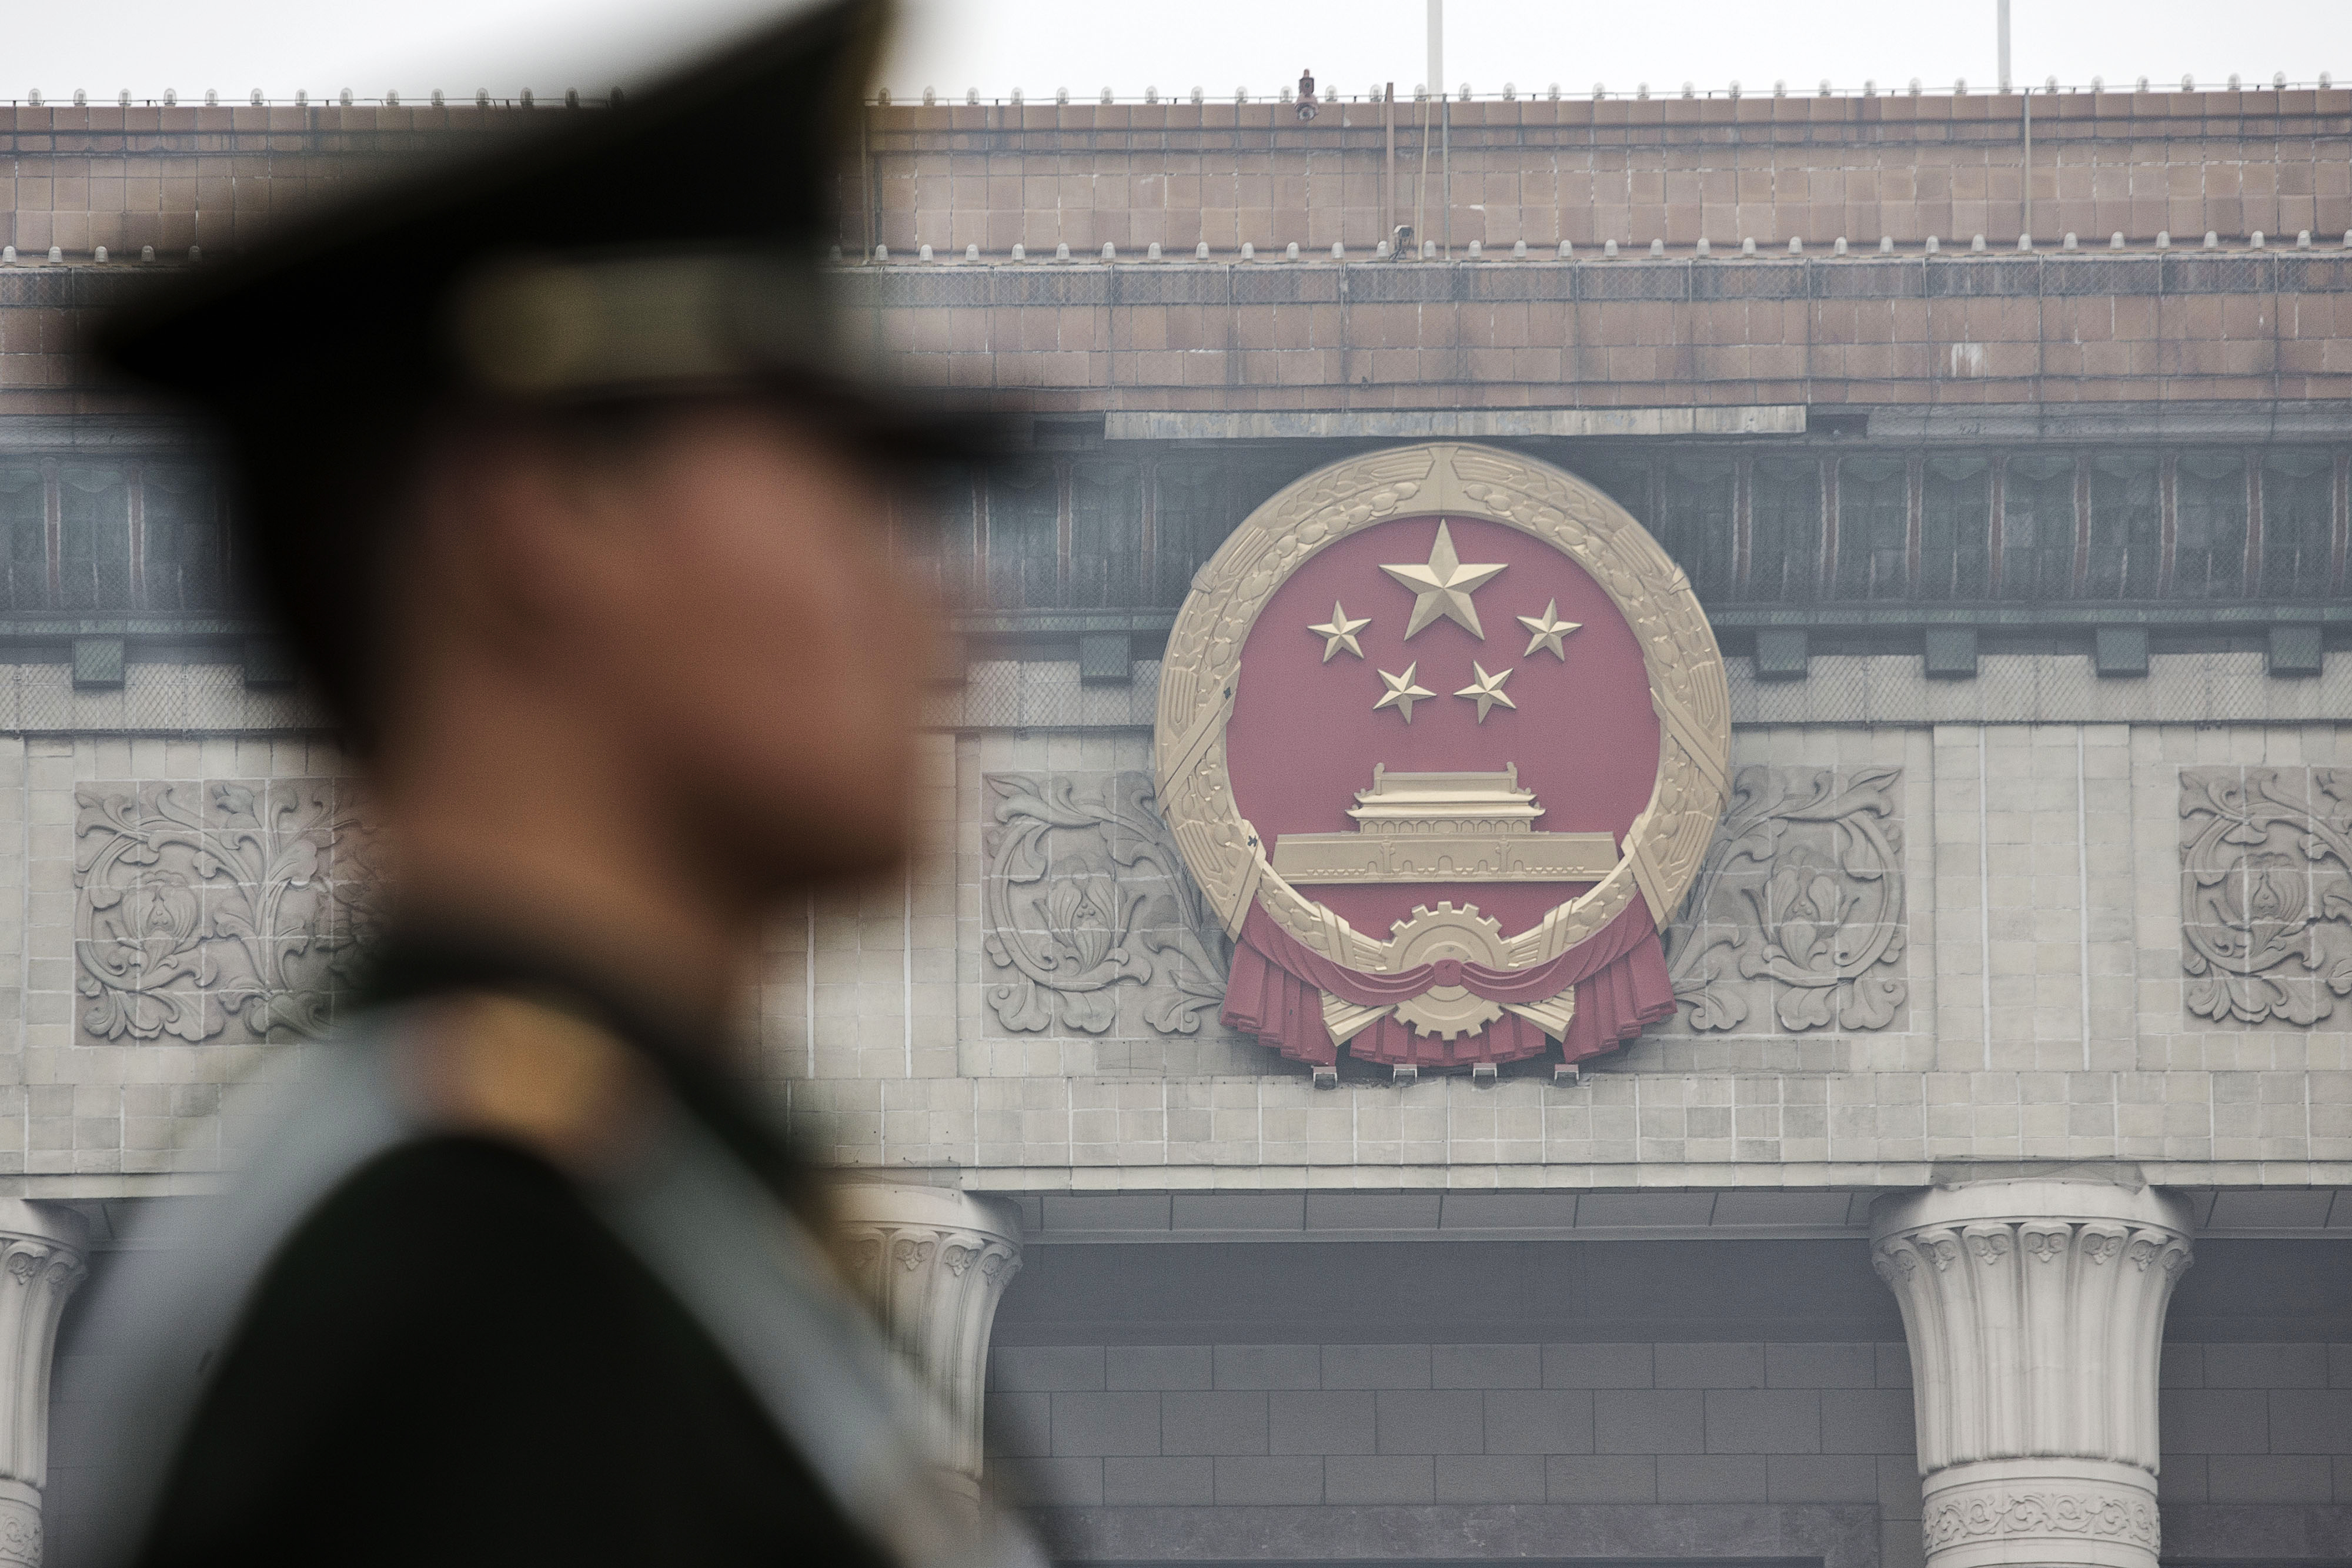 A paramilitary police officer stands guard in front of the Great Hall of the People in Beijing on March 4, 2016 (Bloomberg via Getty Images)